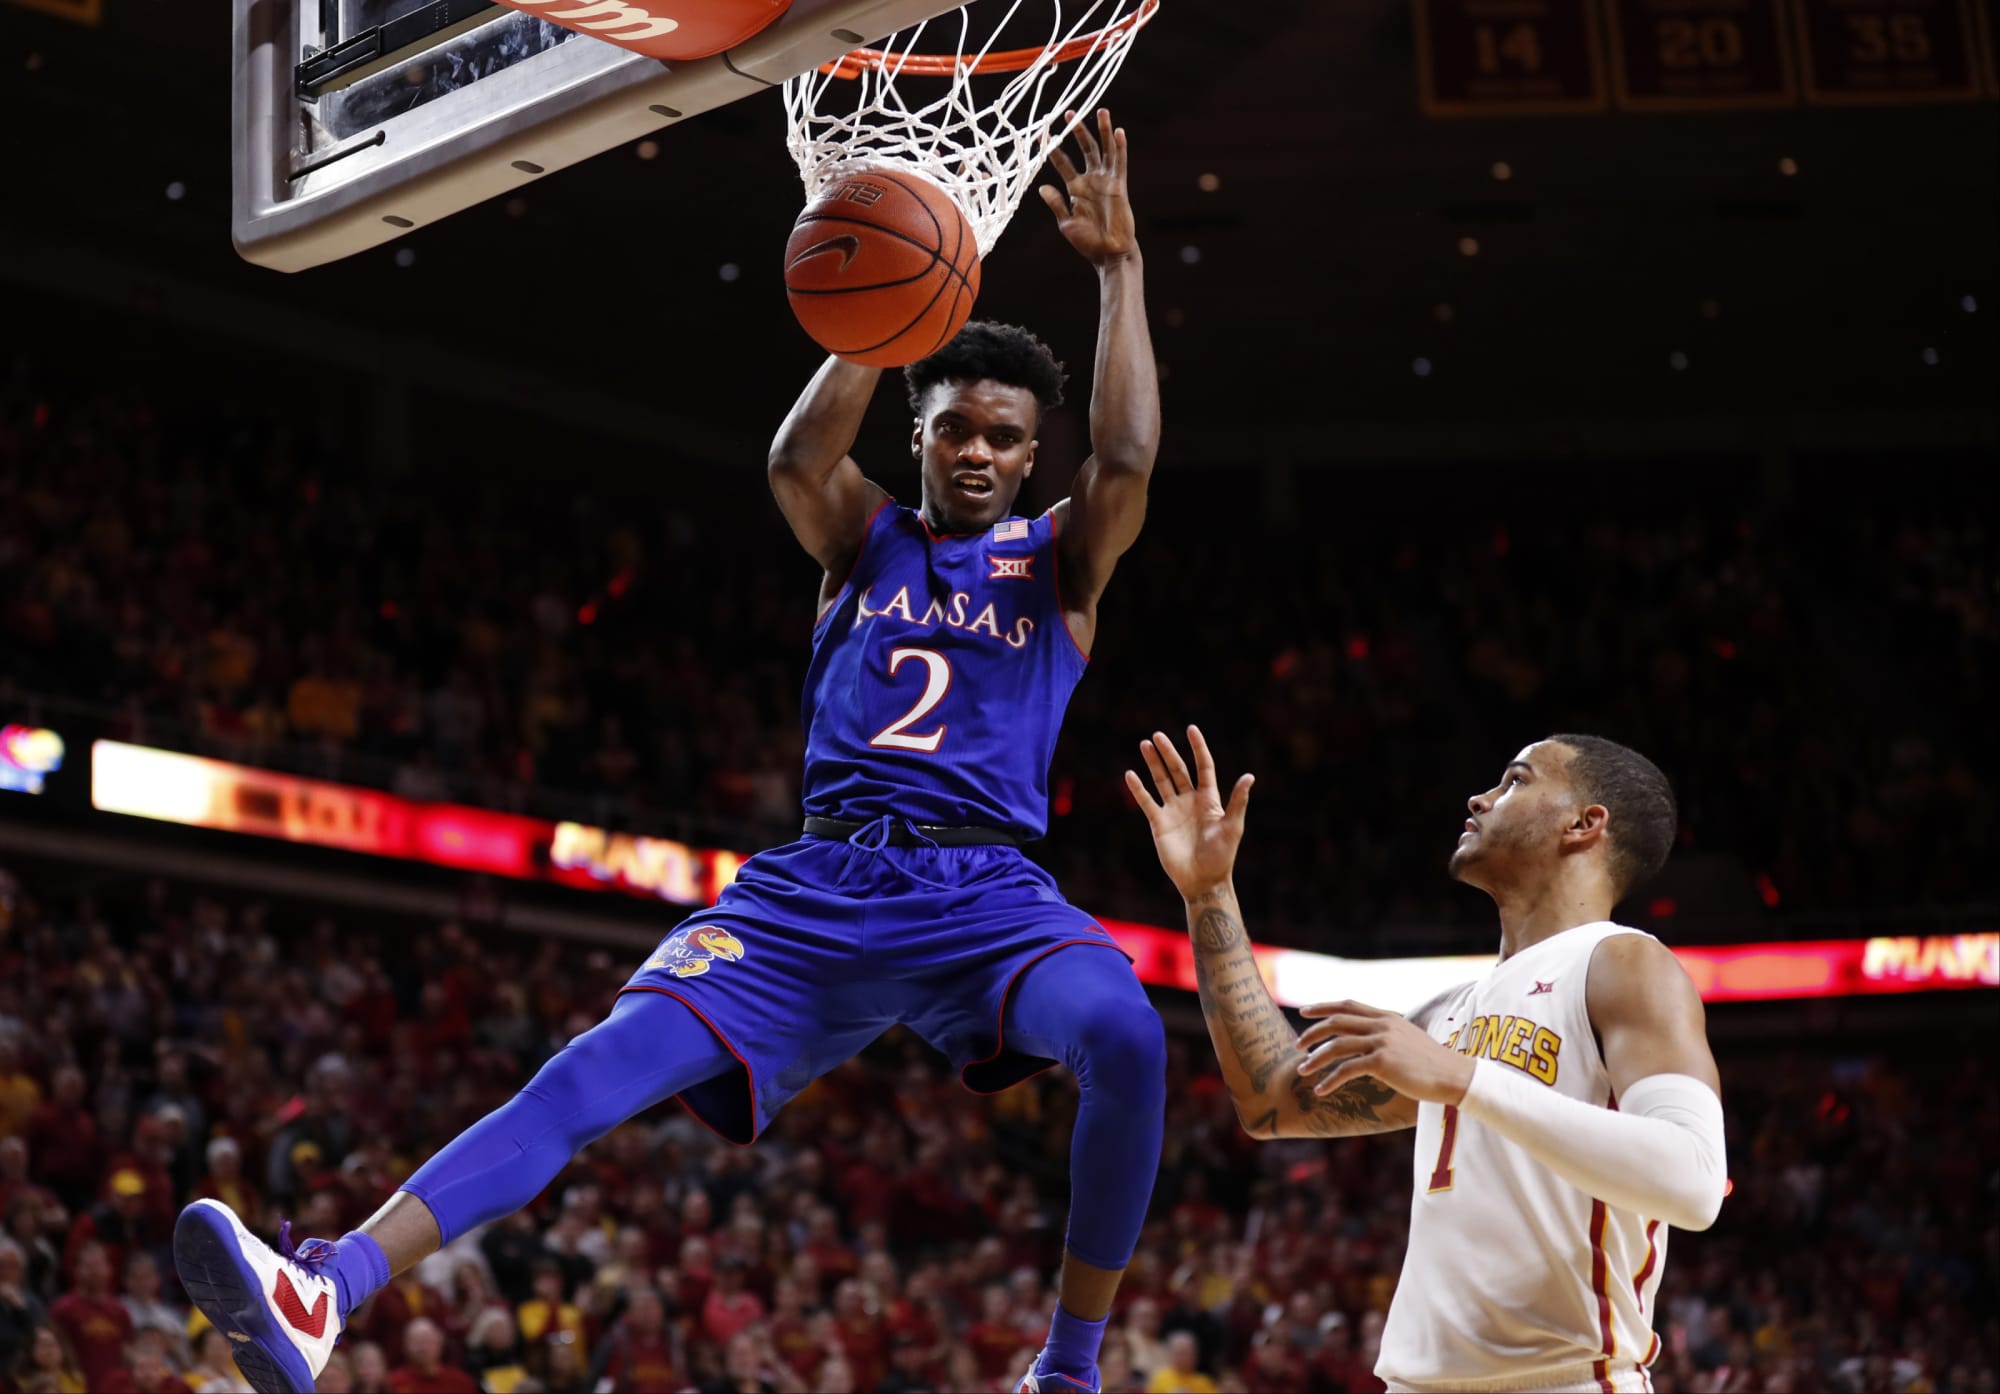 Want to watch Kansas basketball tonight? Sign up for a free ESPN+ trial